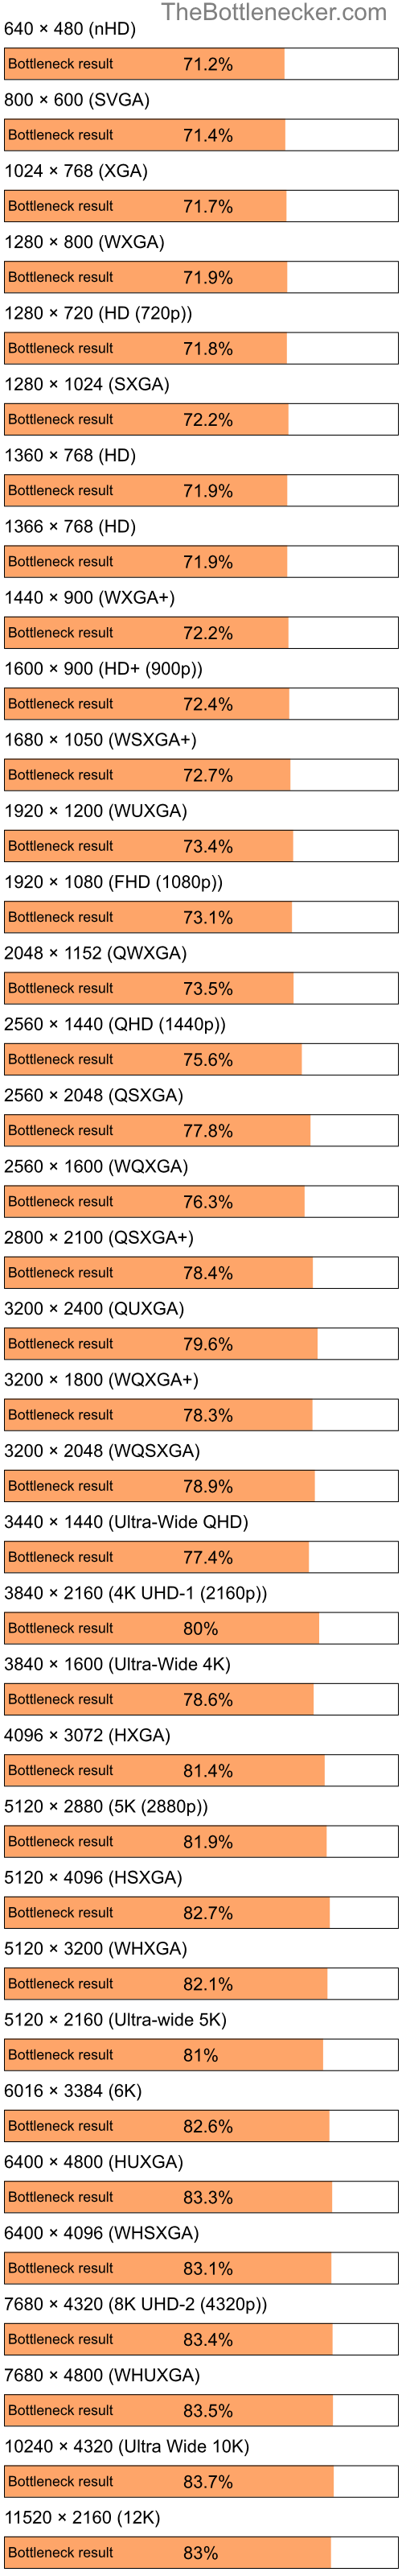 Bottleneck results by resolution for Intel Pentium 4 and AMD Mobility Radeon 9700 in Processor Intense Tasks